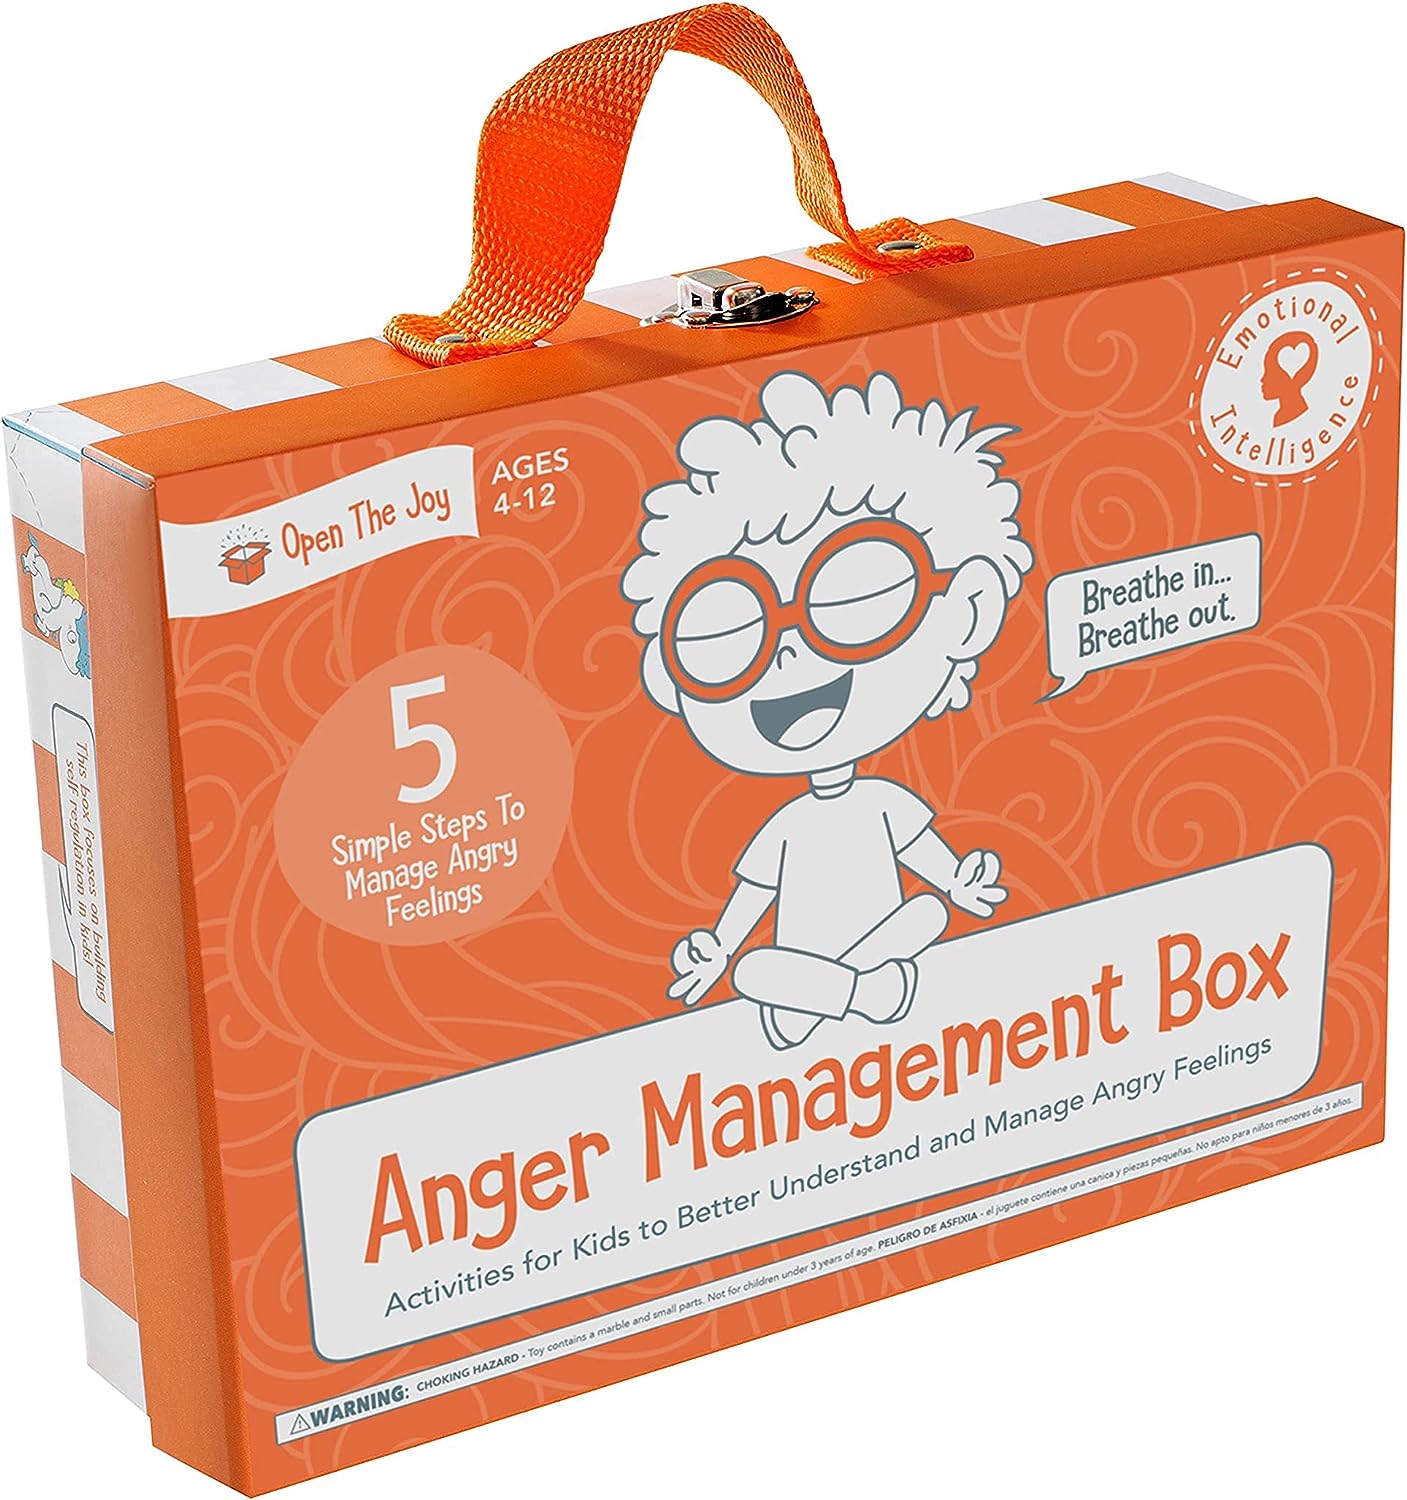 Open The Joy Anger Management Box for Kids | Includes Anger Control Card Game  Other 4 Anger Management Activities to Develop Emotional Intelligence | Anger Game for Kids Ages 4+